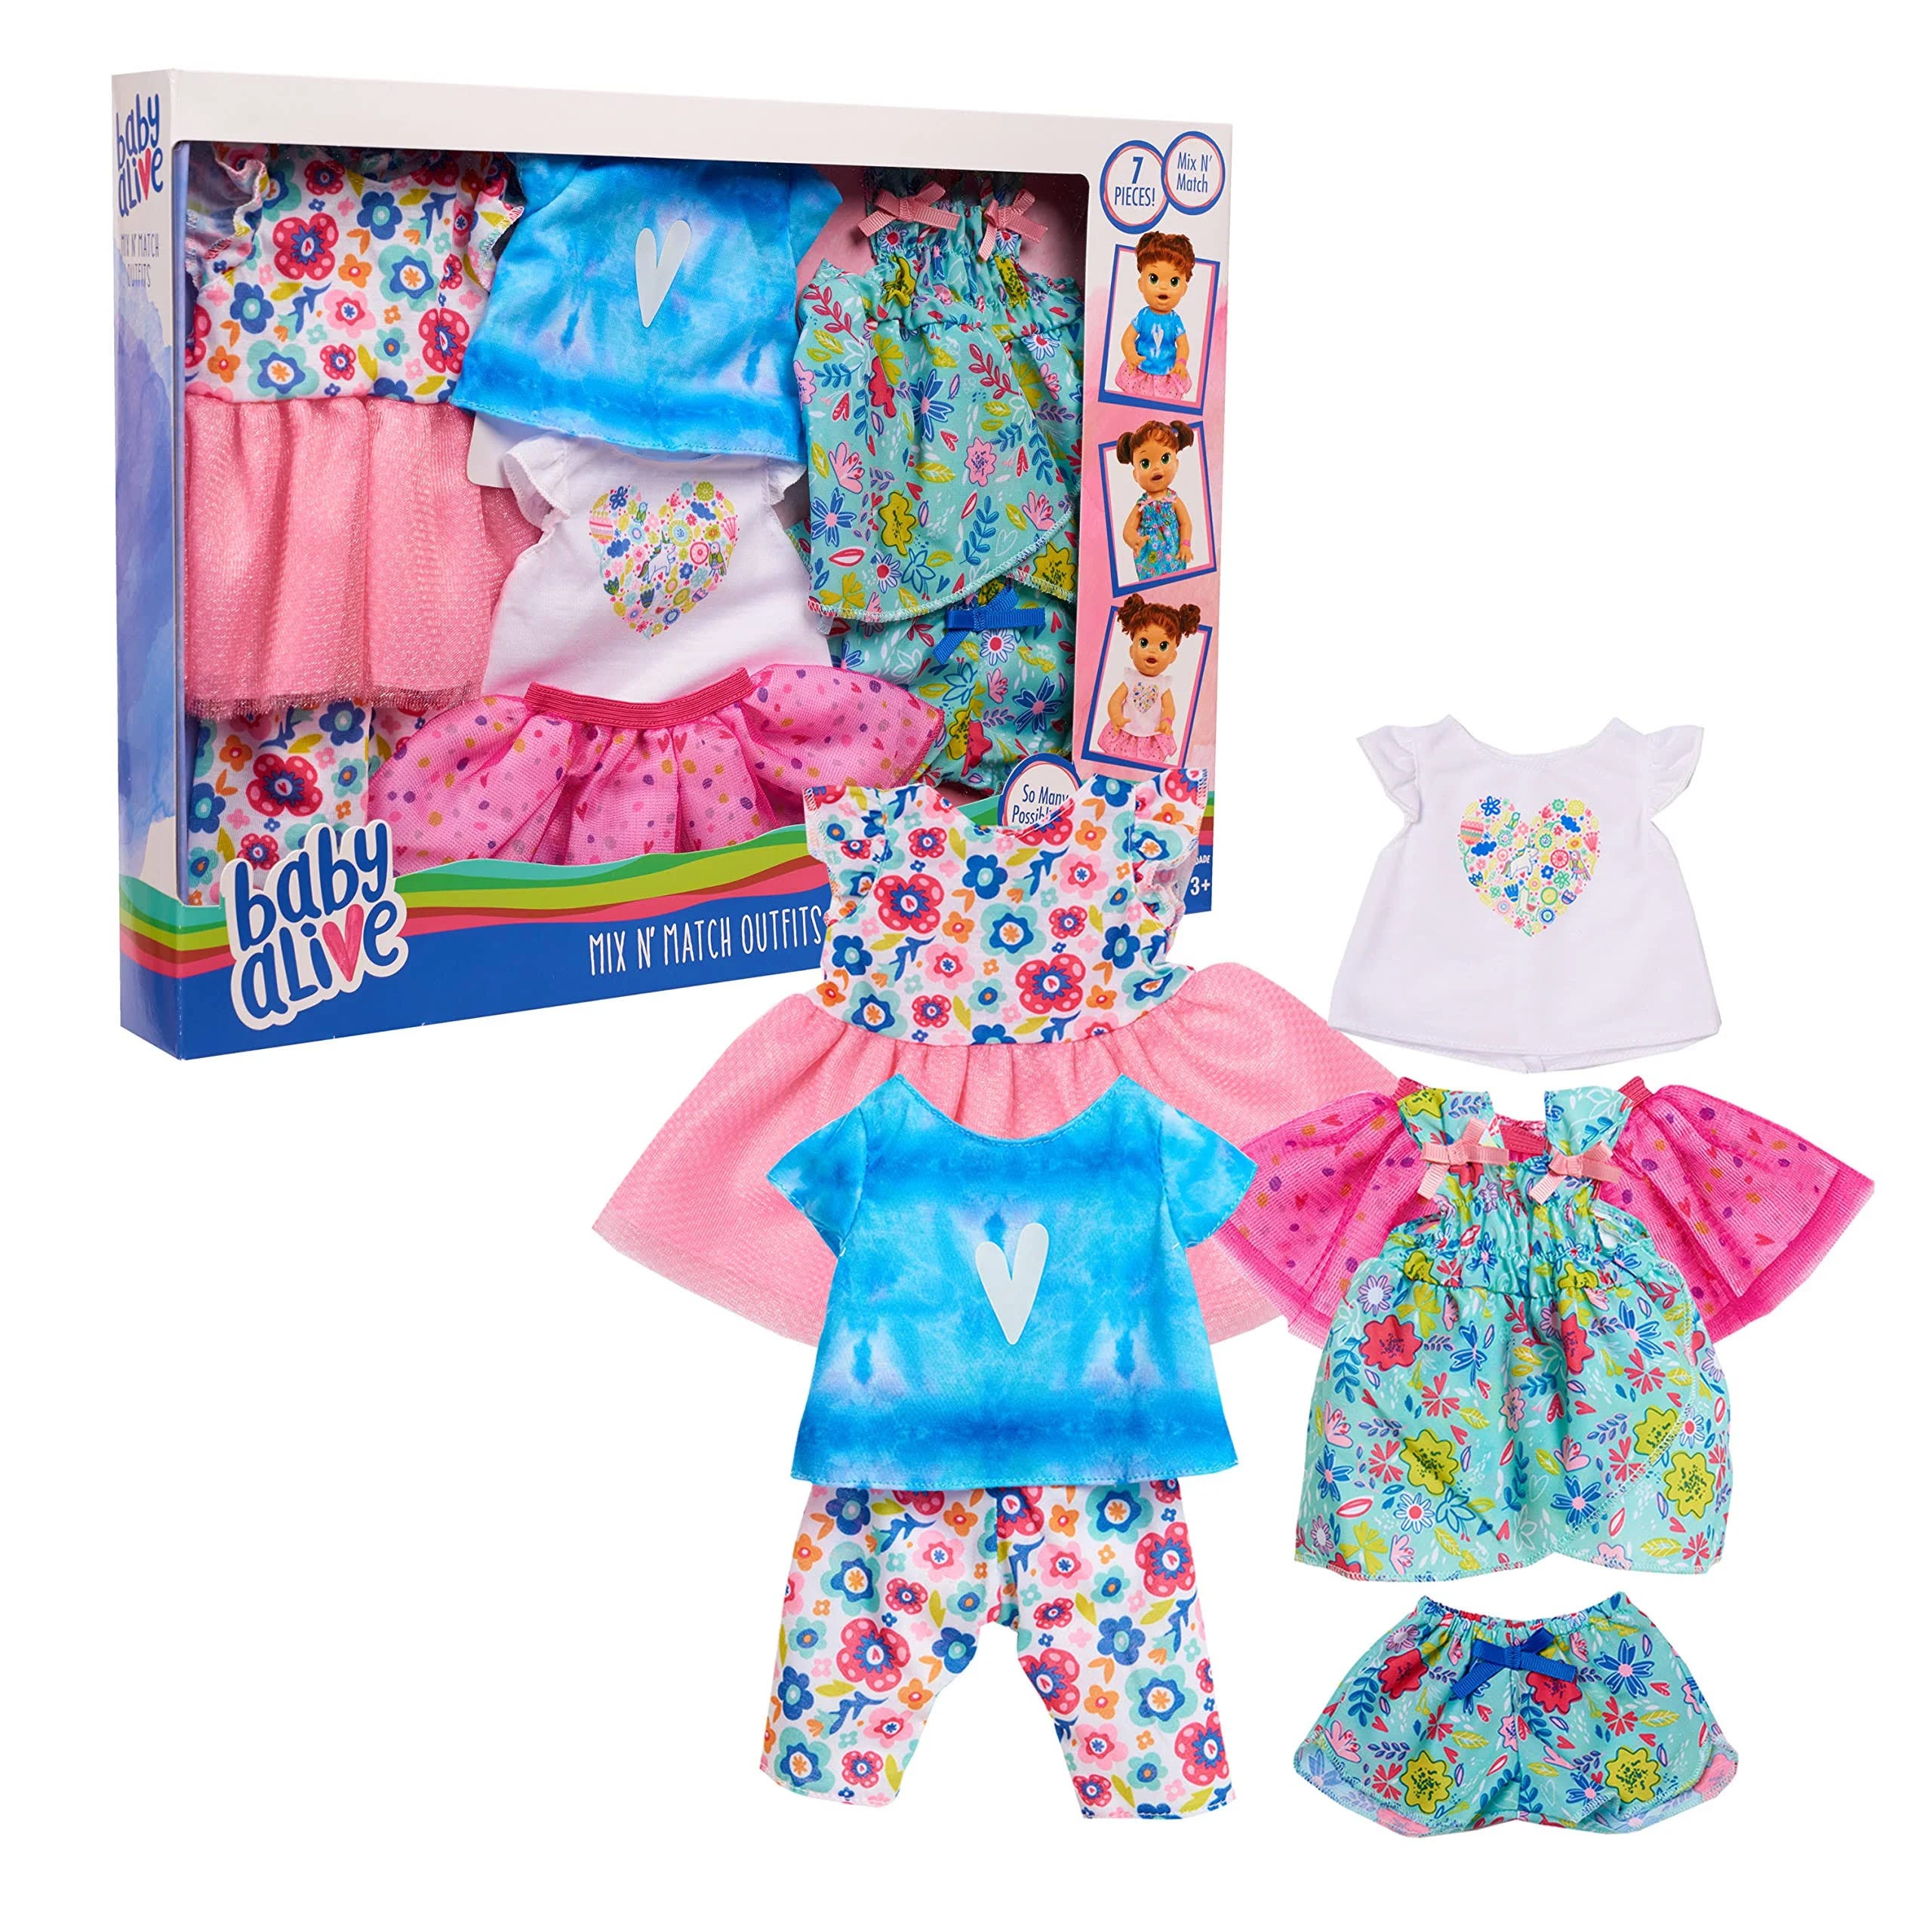 Baby Alive Doll Outfit Sets - Mix N Match Styles | Image